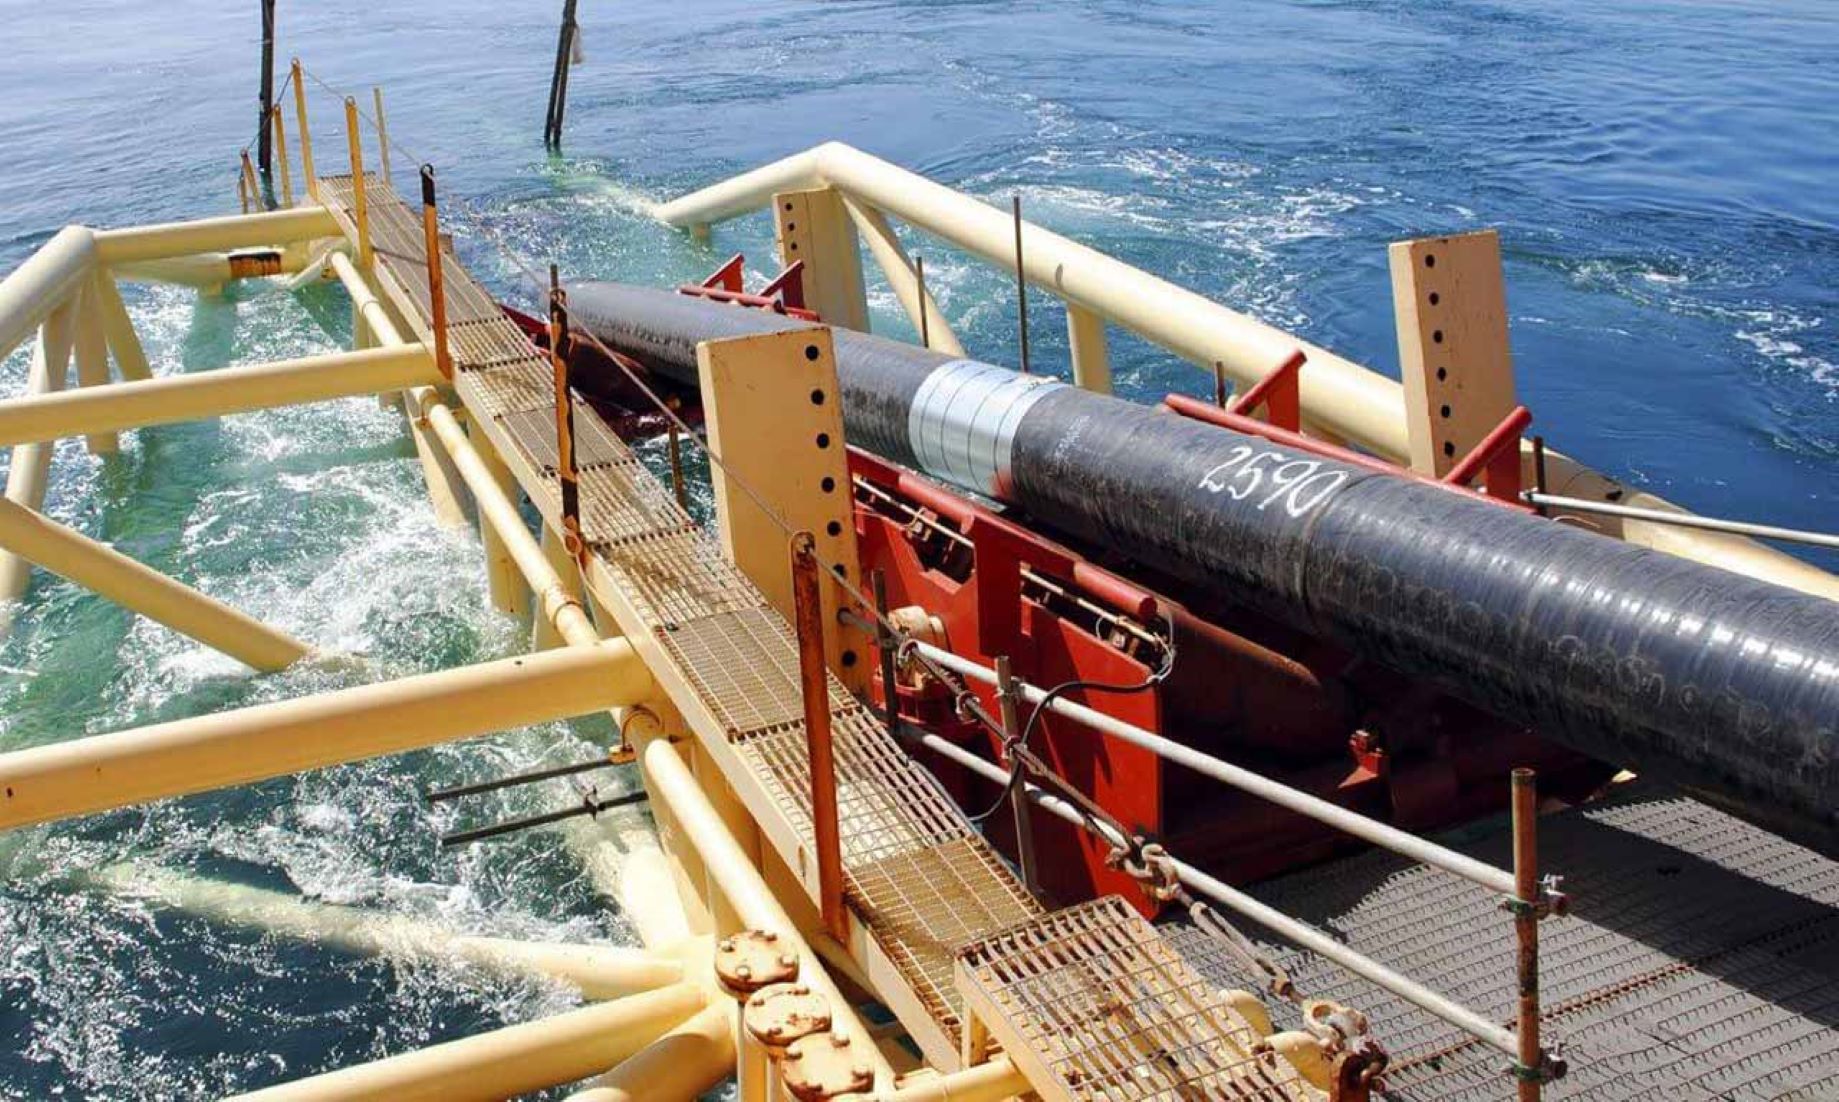 Egypt, Greece Agreed To Build Subsea Telecom Cable In Mediterranean